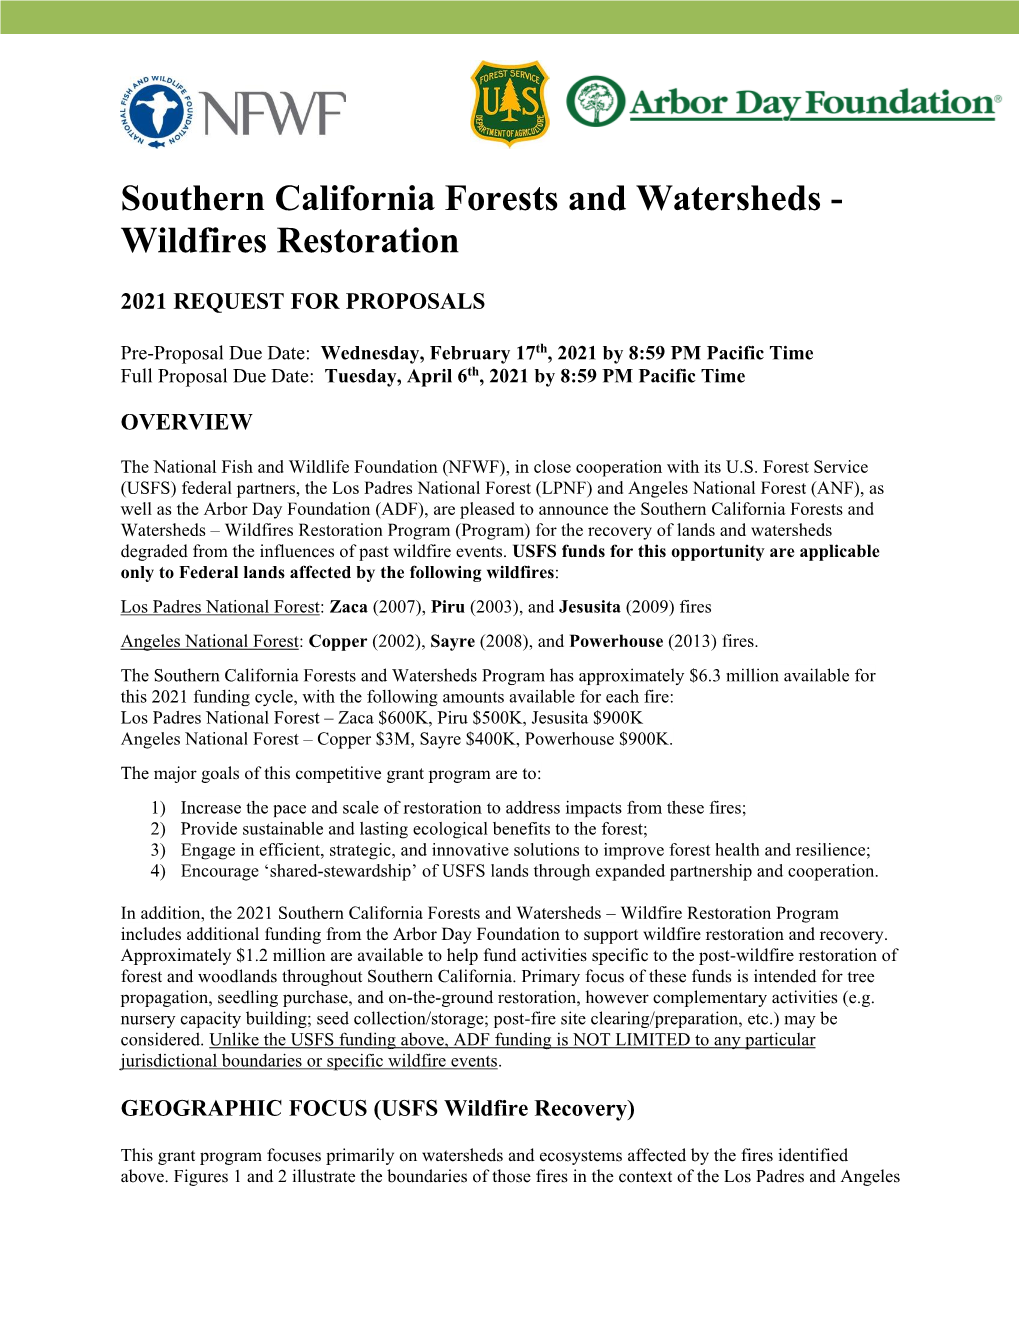 Southern California Forests and Watersheds - Wildfires Restoration